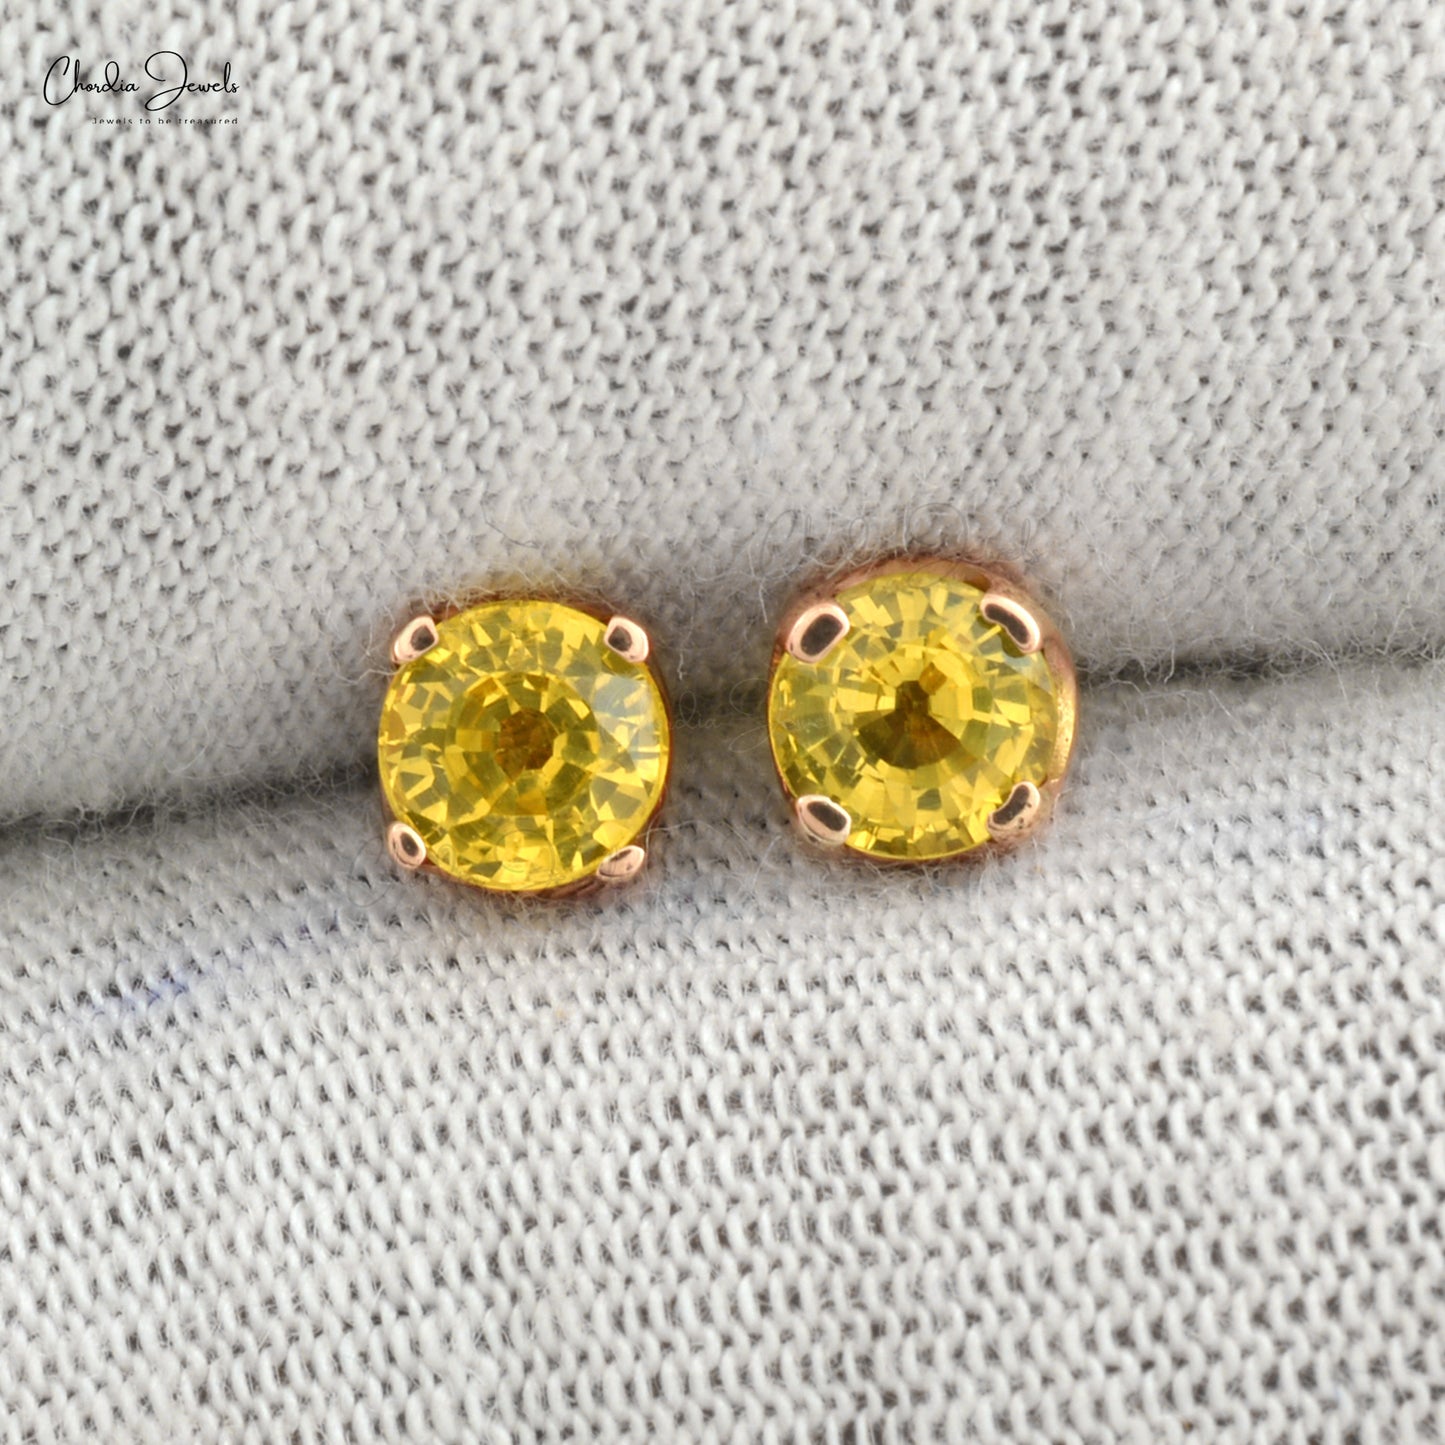 Natural Yellow Sapphire Solitaire Studs Earring in 14k Rose Gold 4mm Round-Cut Gemstone Dainty Earrings